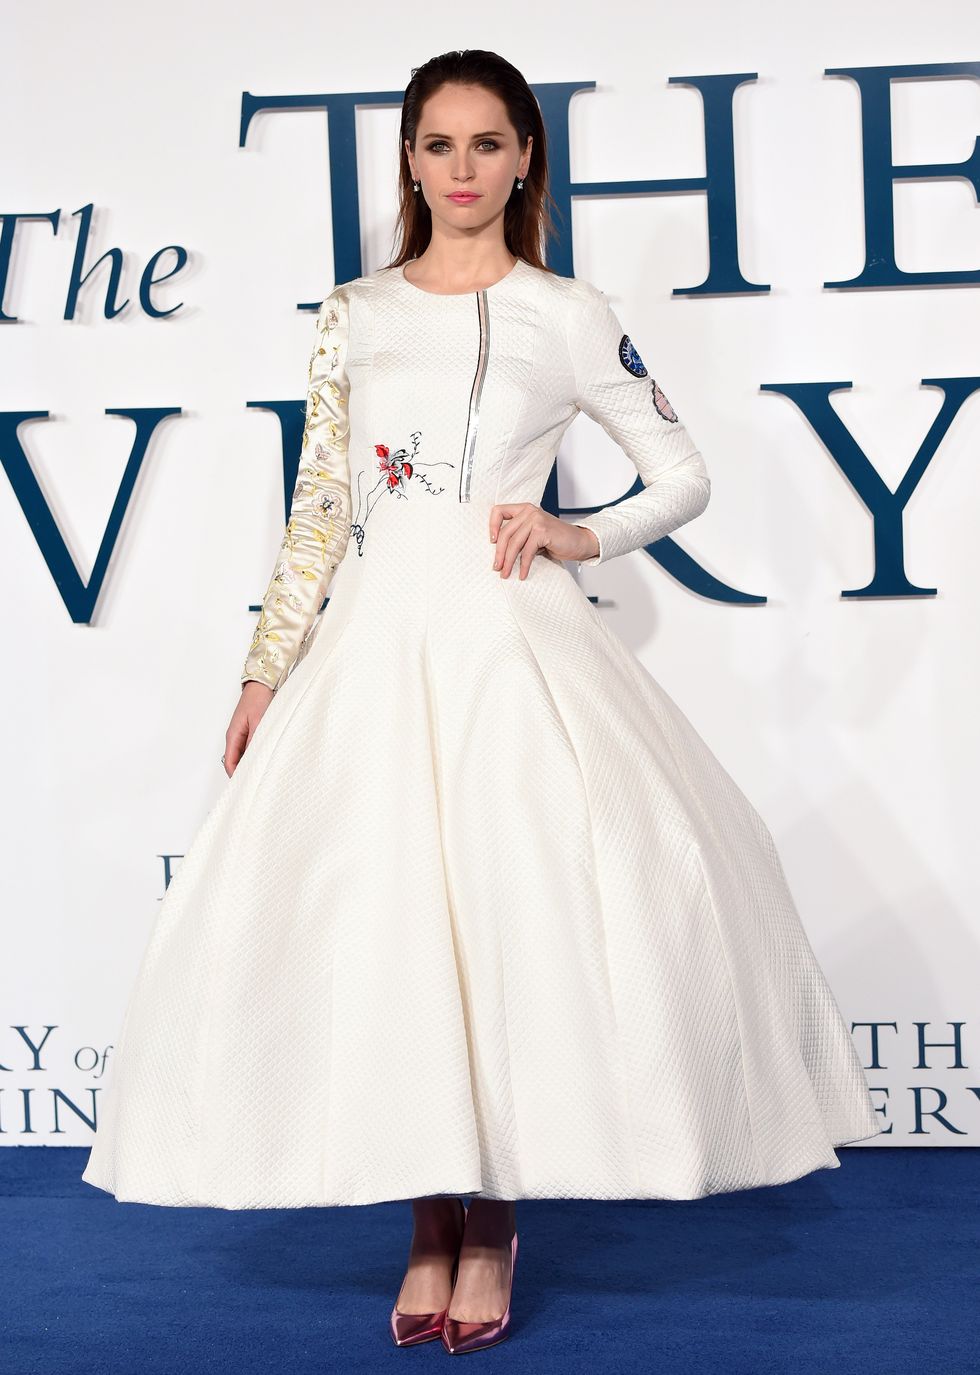 Felicity Jones wearing a white Christian Dior dress at the Theory of Everything premiere